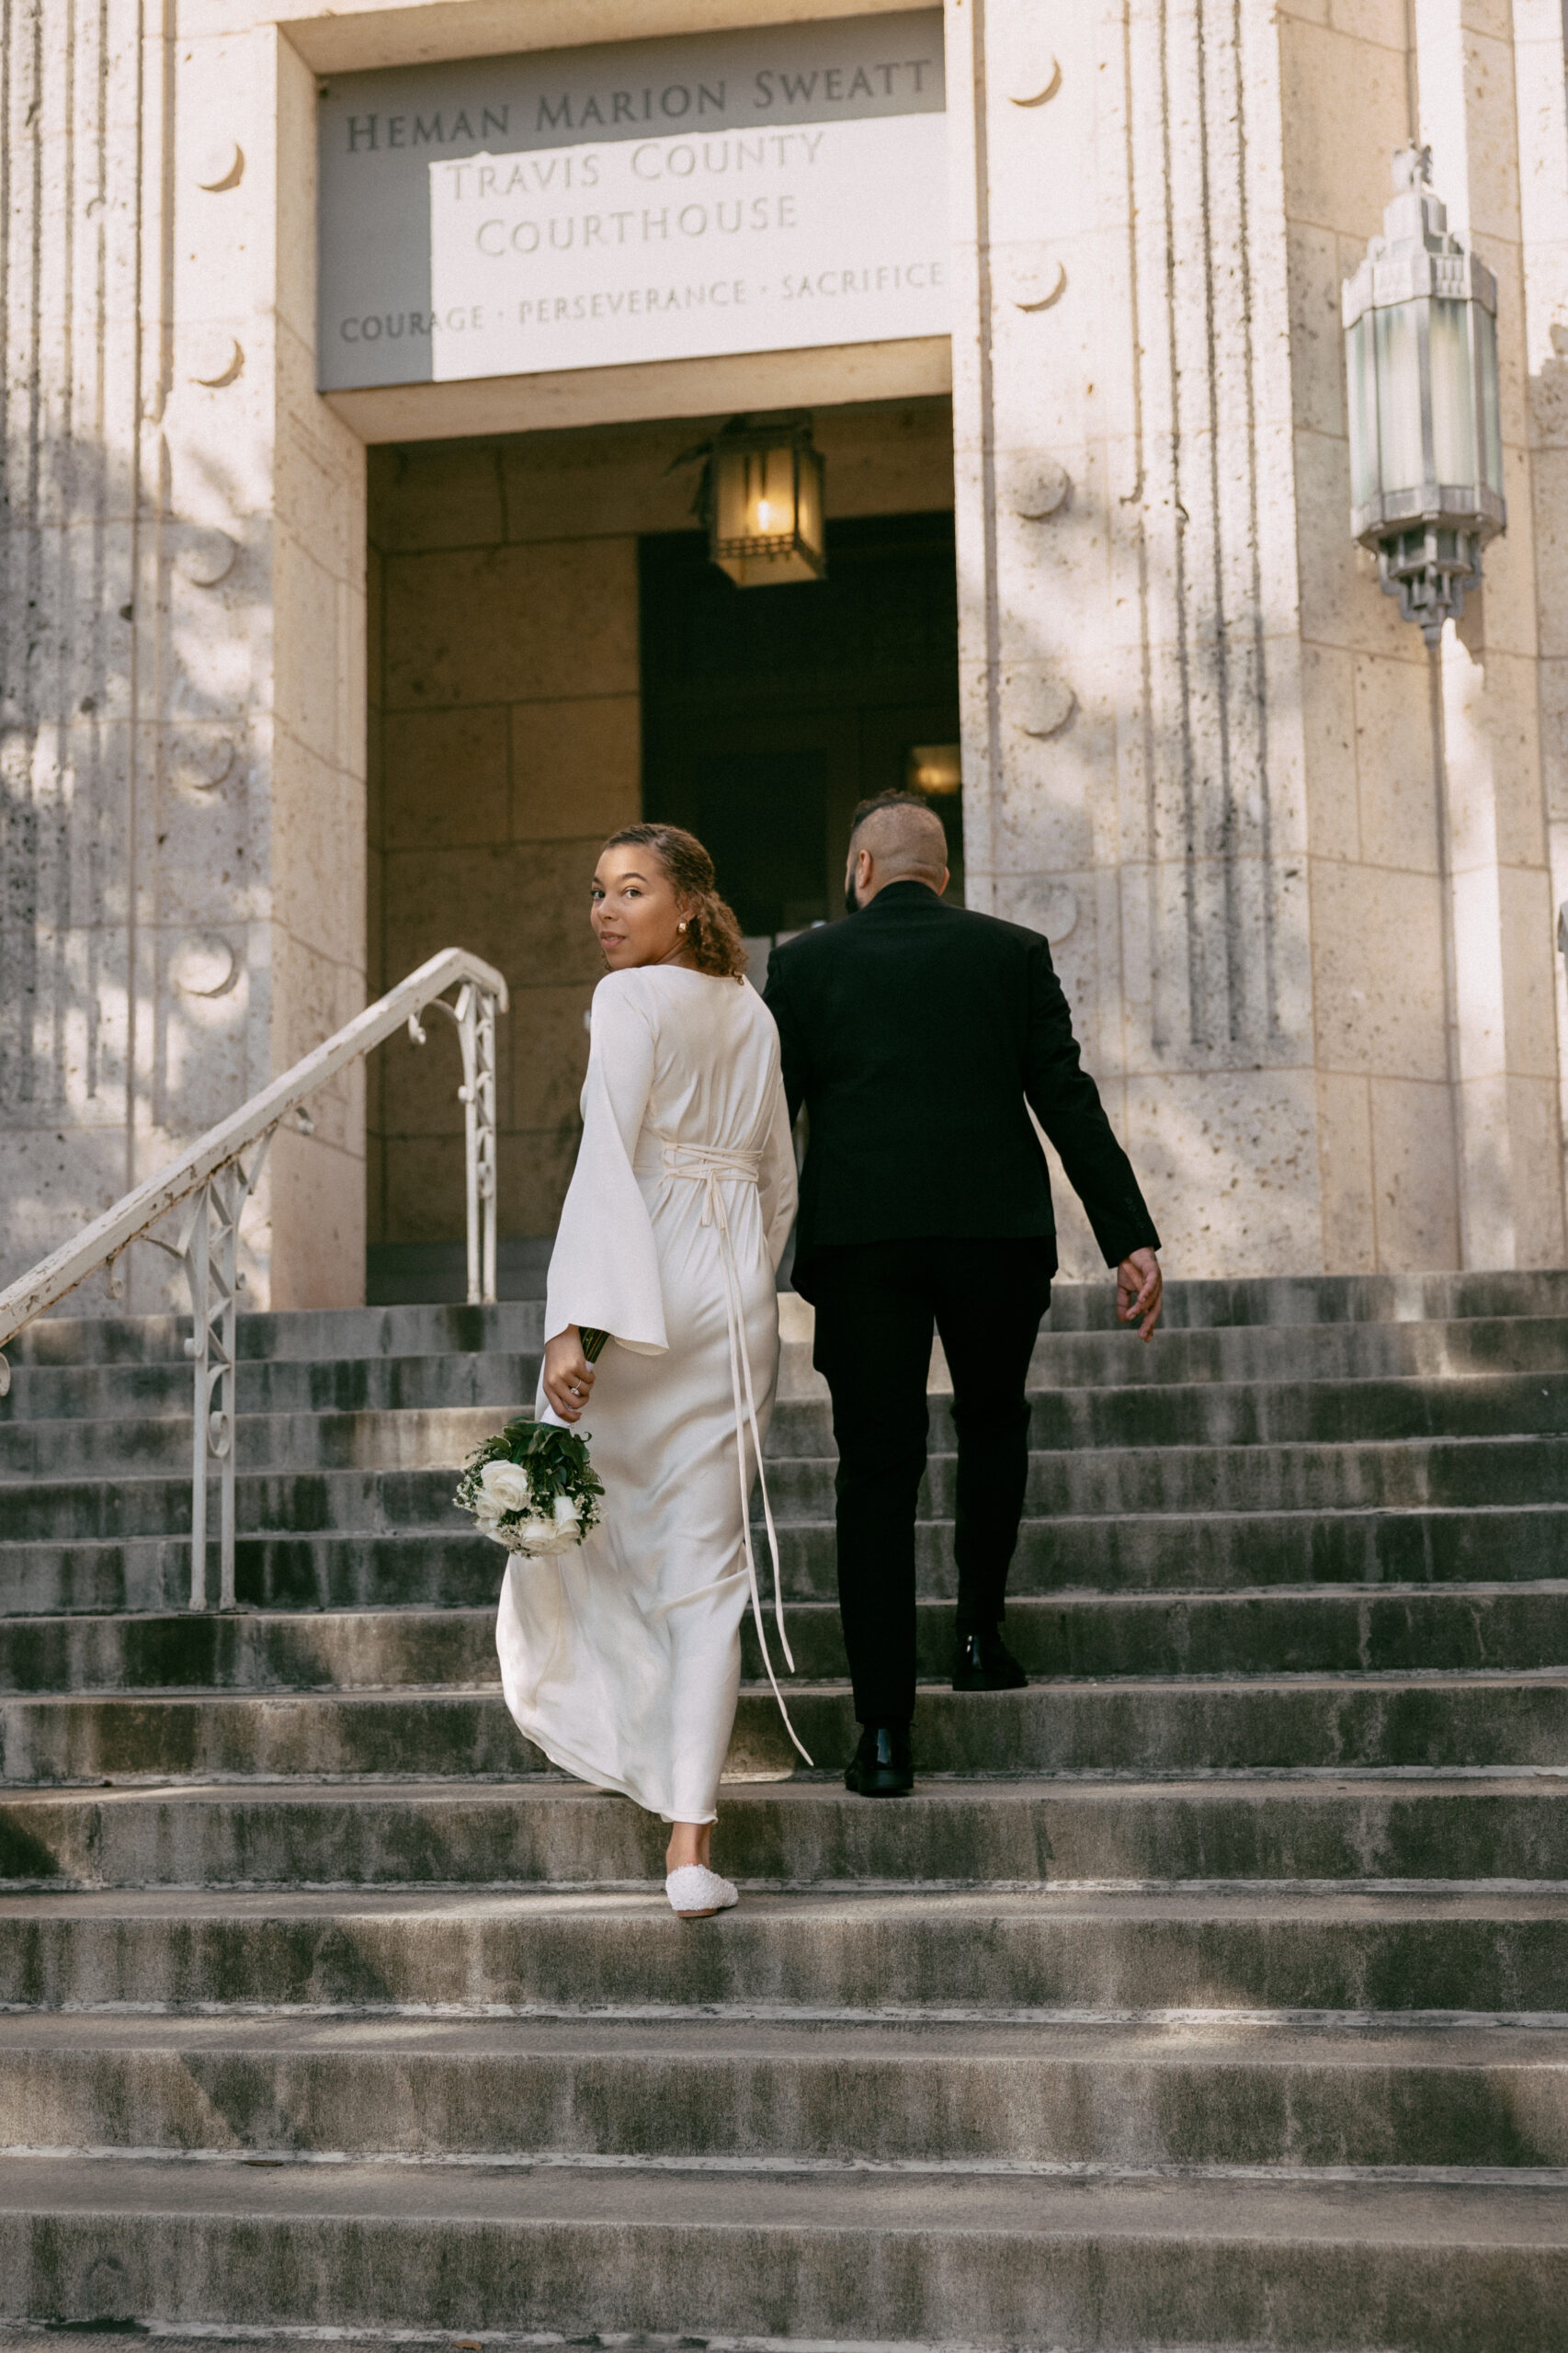 travis county courthouse wedding elopement